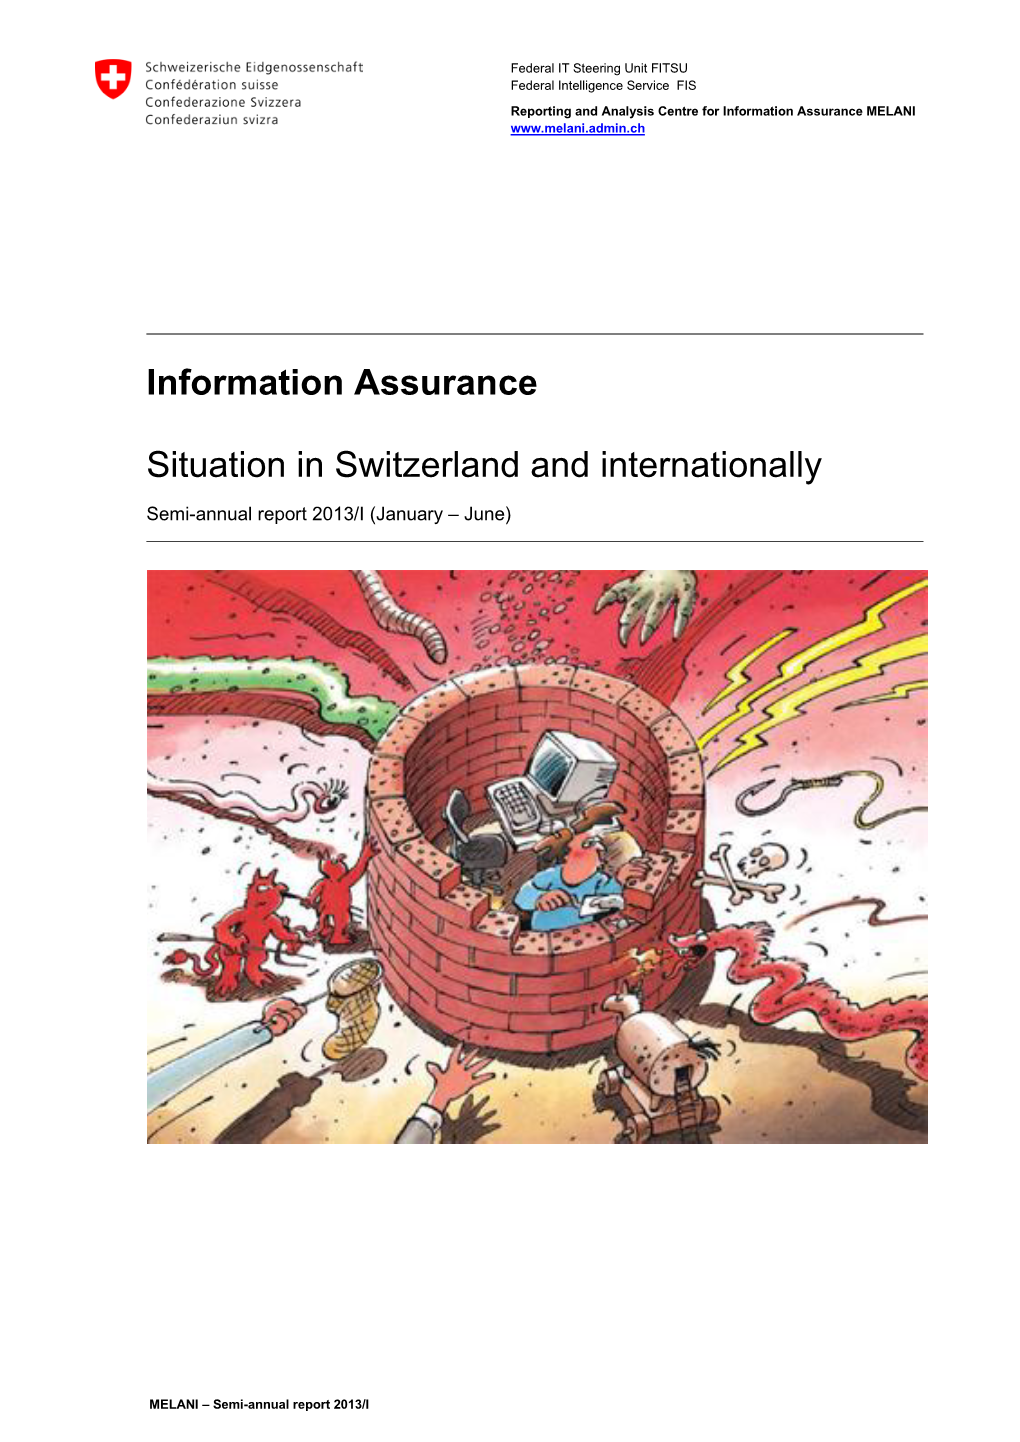 Information Assurance Situation in Switzerland and Internationally